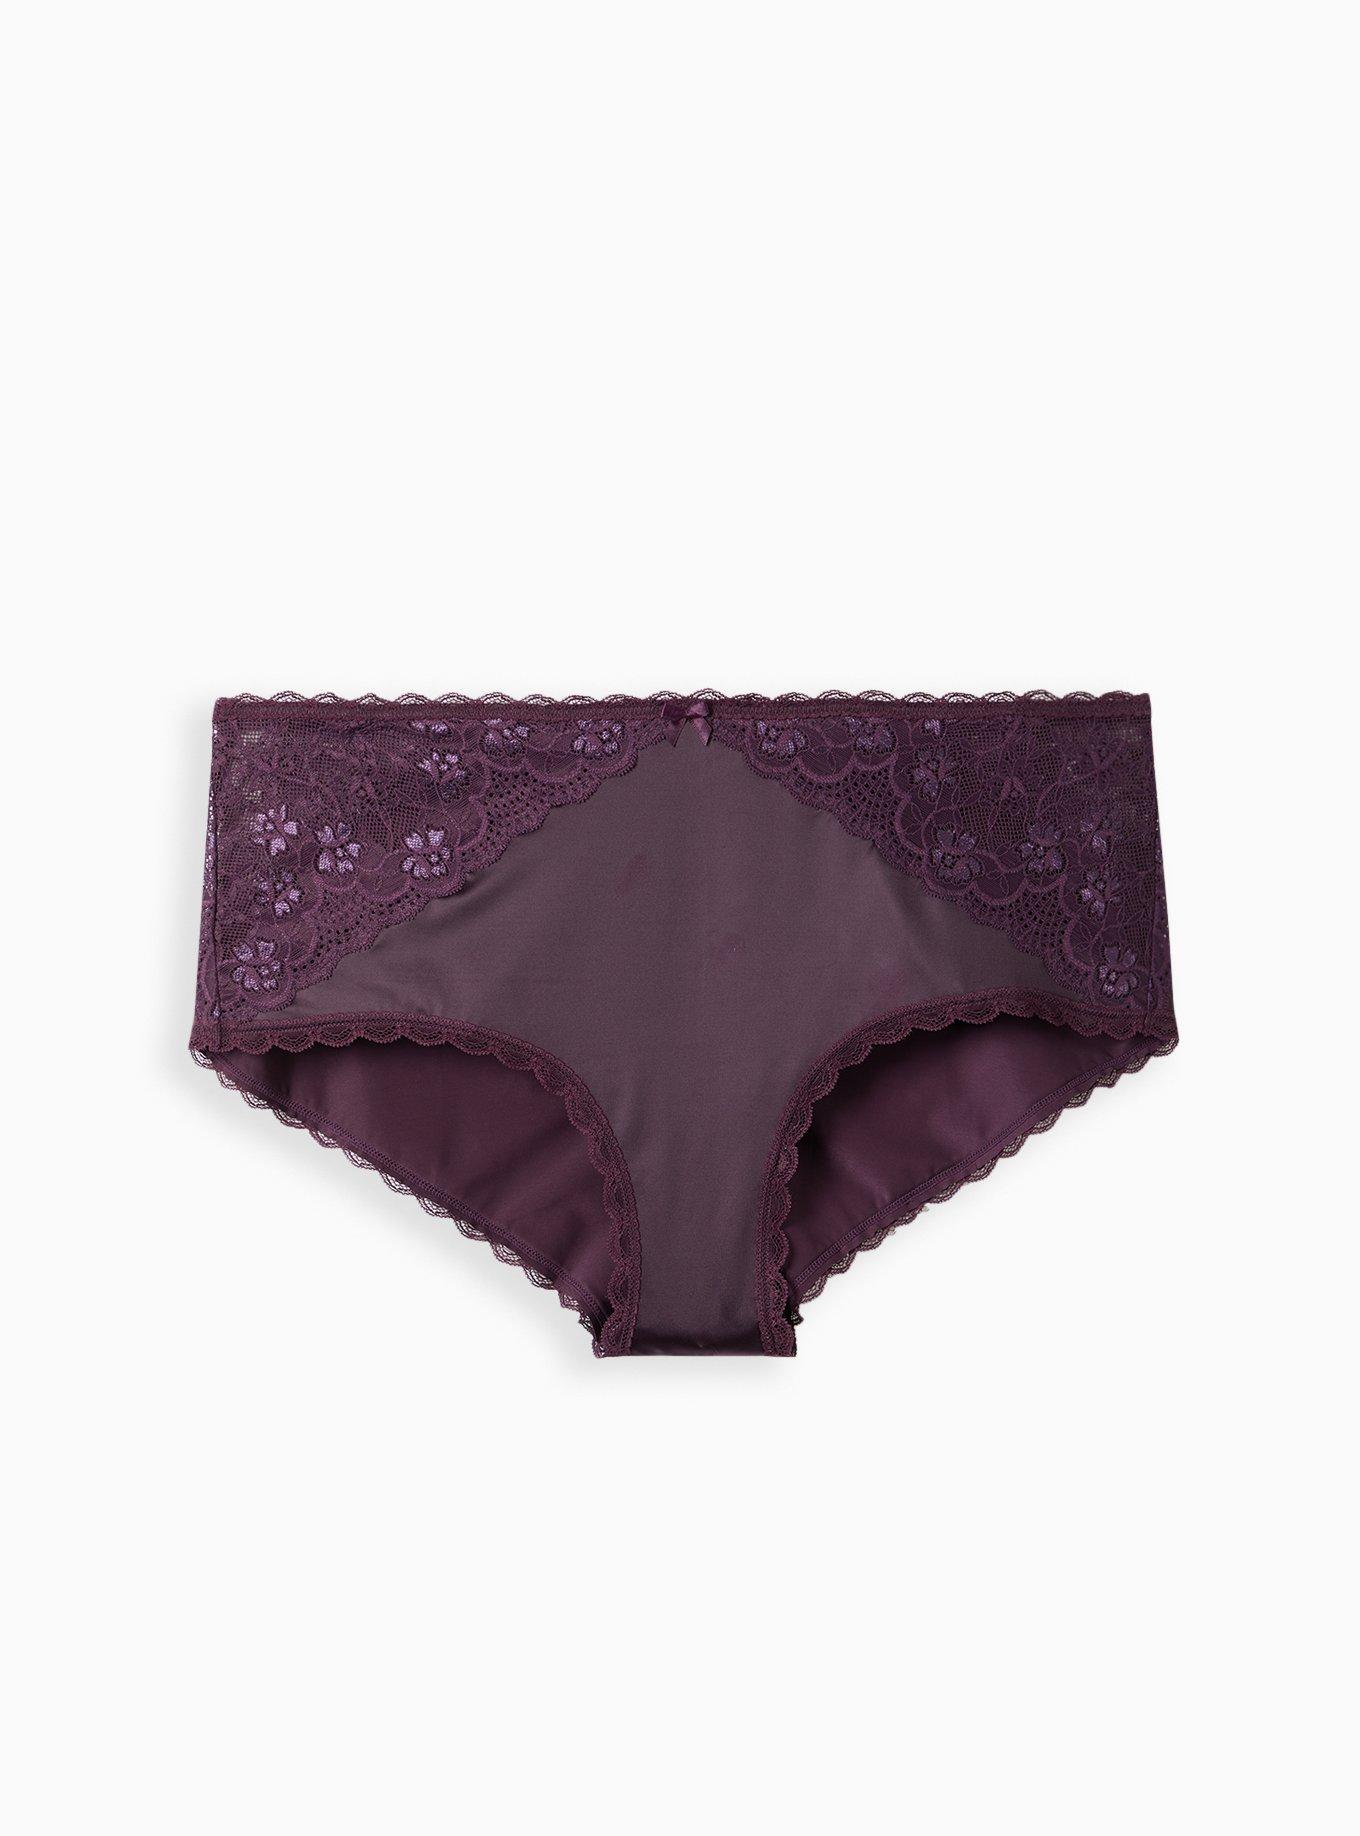 Buy Victoria's Secret PINK Pink Plum Shine Cheeky Cotton Knickers